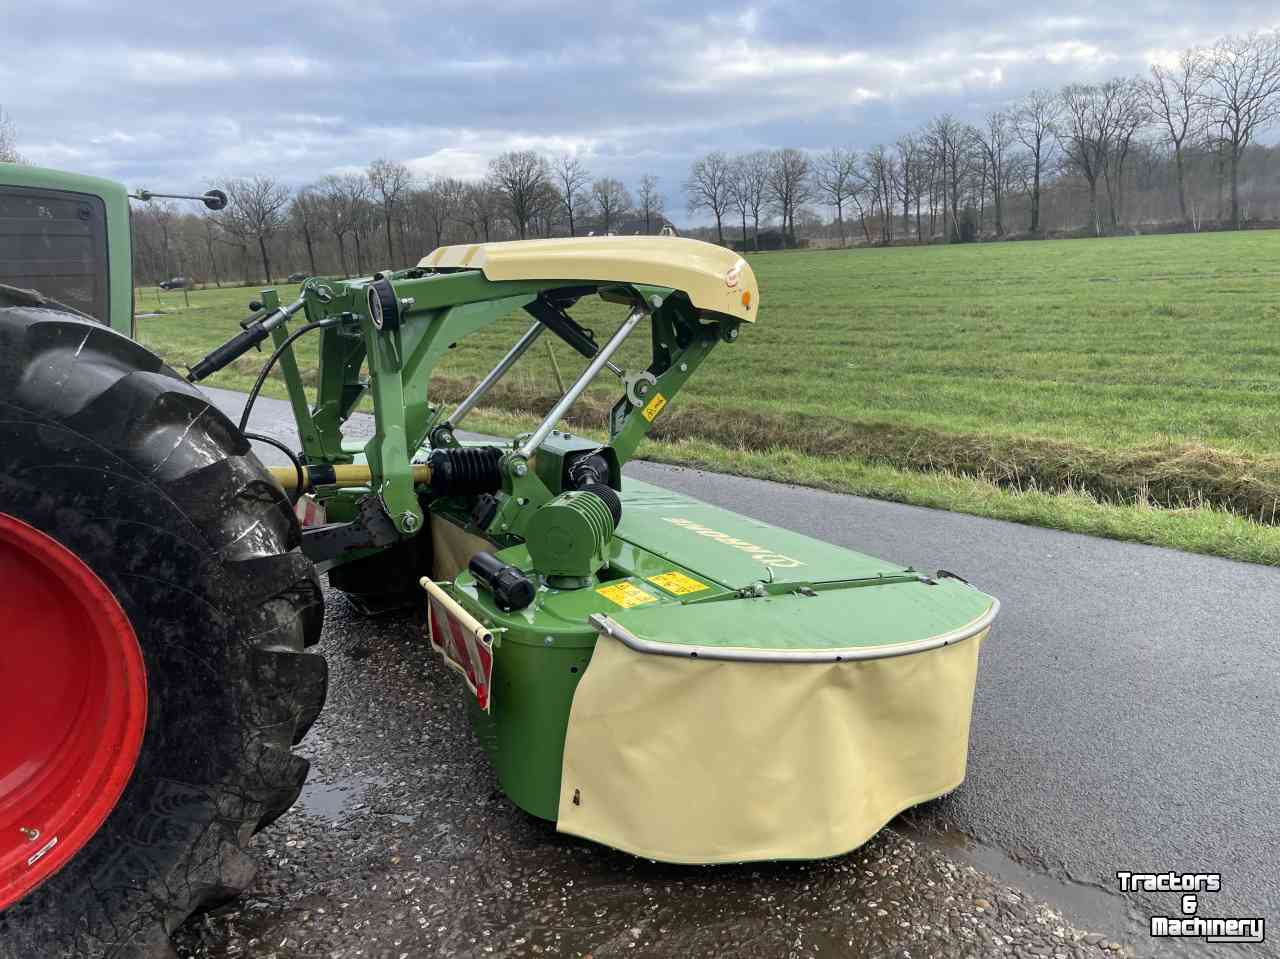 Faucheuse Krone Easycut F 320 Pull